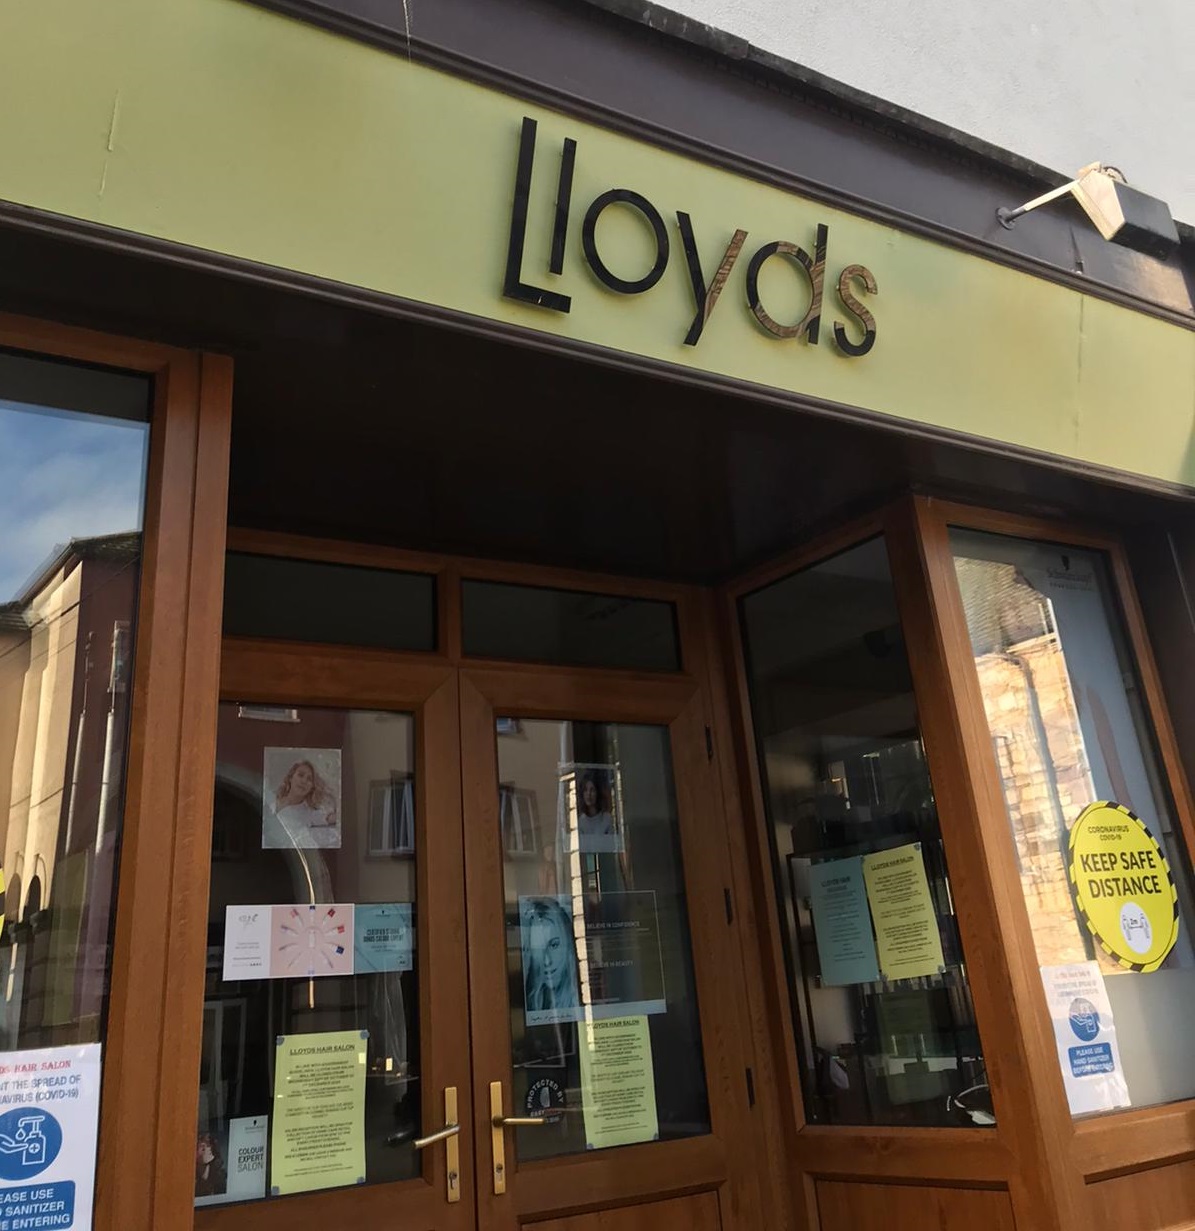 5 Ways to Support Lloyds